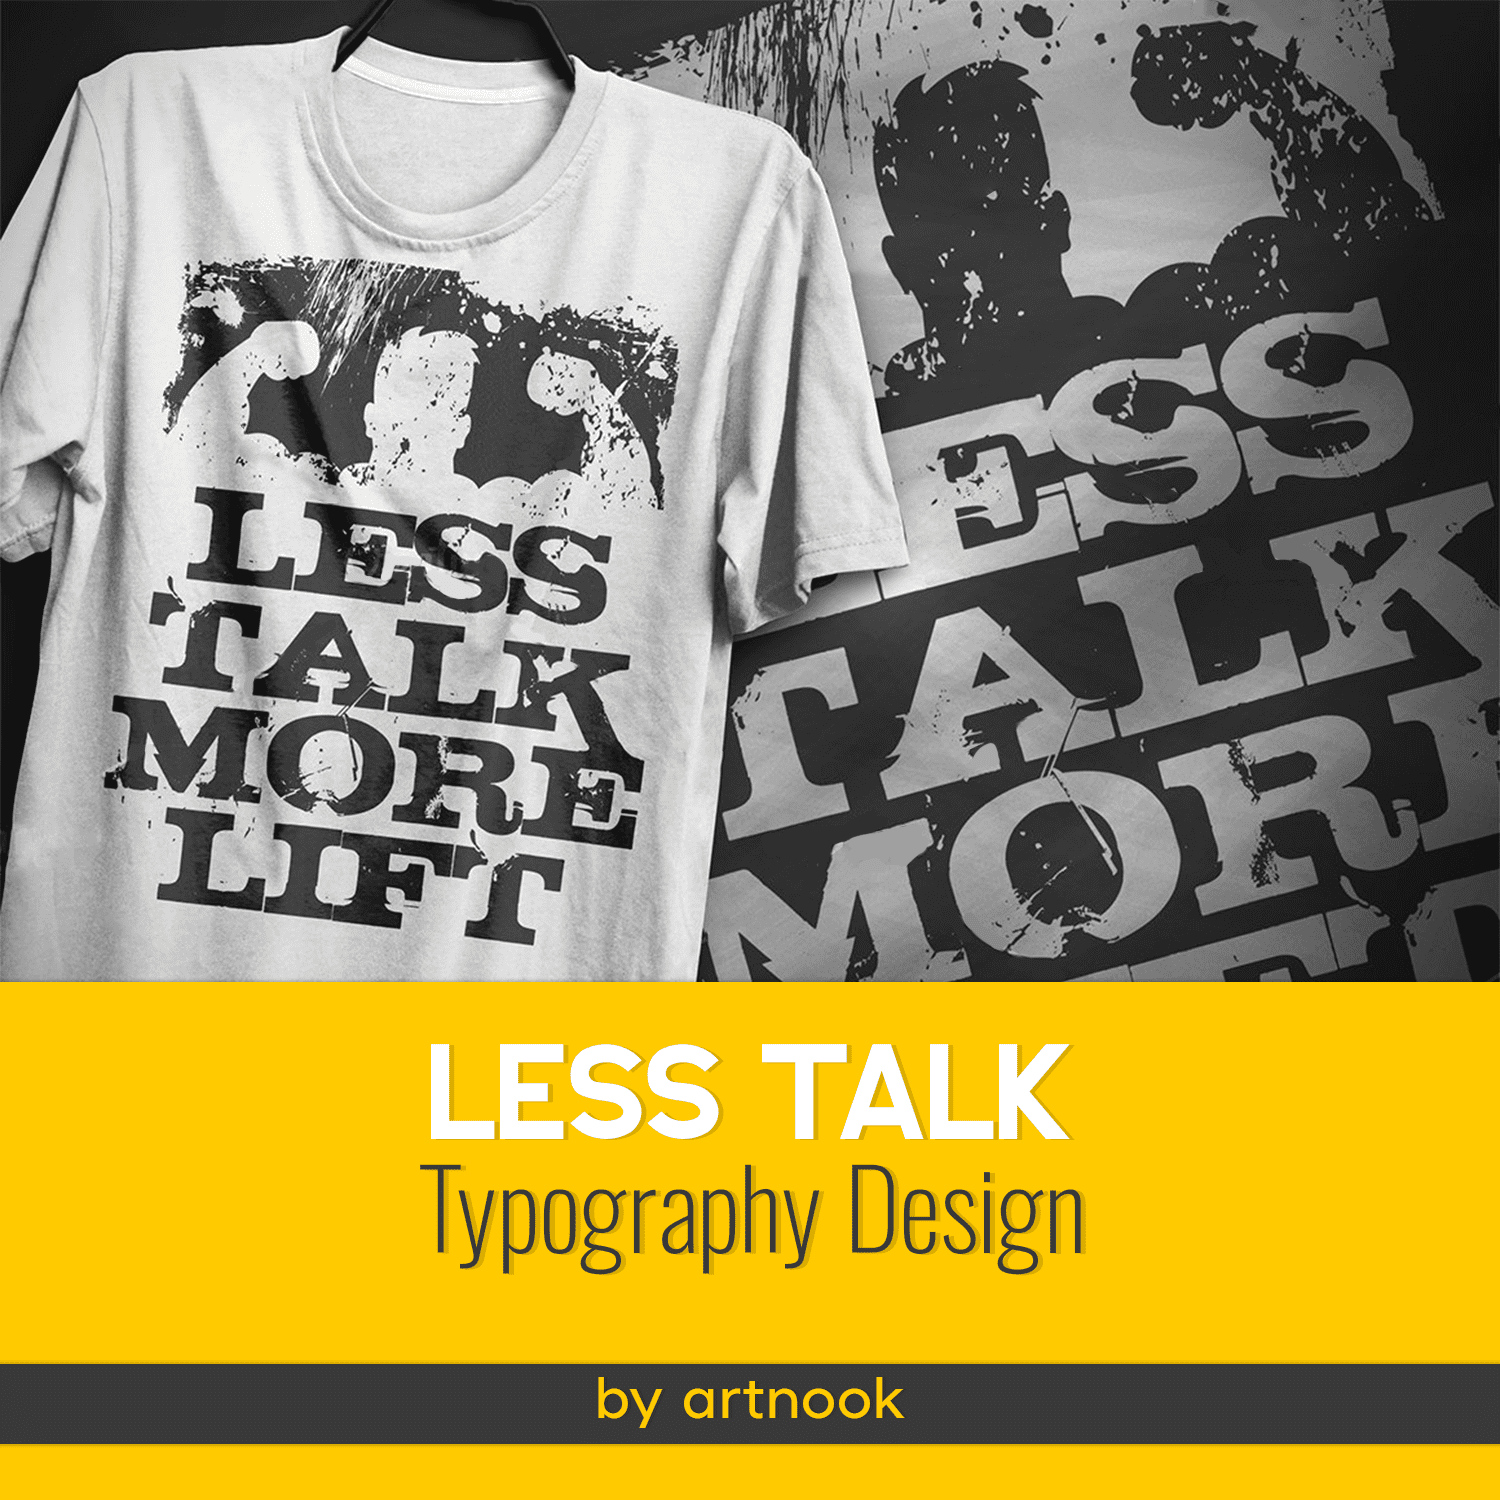 Less talk - Typography Design cover.